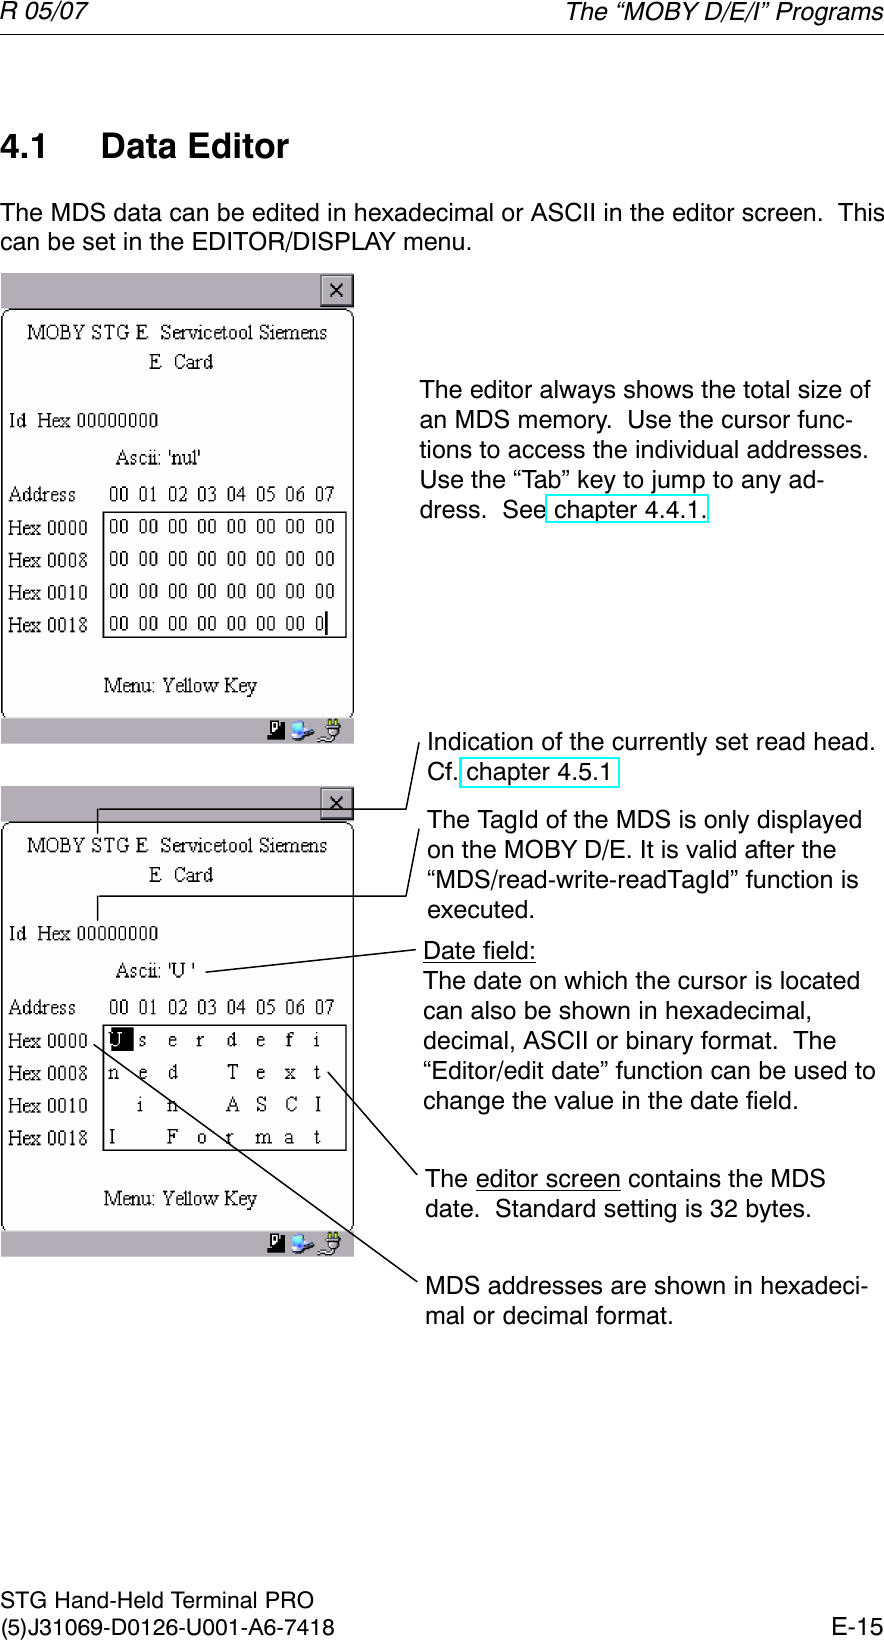 R 05/07E-15STG Hand-Held Terminal PRO(5)J31069-D0126-U001-A6-74184.1 Data EditorThe MDS data can be edited in hexadecimal or ASCII in the editor screen.  Thiscan be set in the EDITOR/DISPLAY menu.The editor always shows the total size ofan MDS memory.  Use the cursor func-tions to access the individual addresses.Use the “Tab” key to jump to any ad-dress.  See chapter 4.4.1.Indication of the currently set read head.Cf. chapter 4.5.1The TagId of the MDS is only displayedon the MOBY D/E. It is valid after the“MDS/read-write-readTagId” function isexecuted.Date field:The date on which the cursor is locatedcan also be shown in hexadecimal,decimal, ASCII or binary format.  The“Editor/edit date” function can be used tochange the value in the date field.The editor screen contains the MDSdate.  Standard setting is 32 bytes.MDS addresses are shown in hexadeci-mal or decimal format.The “MOBY D/E/I” Programs